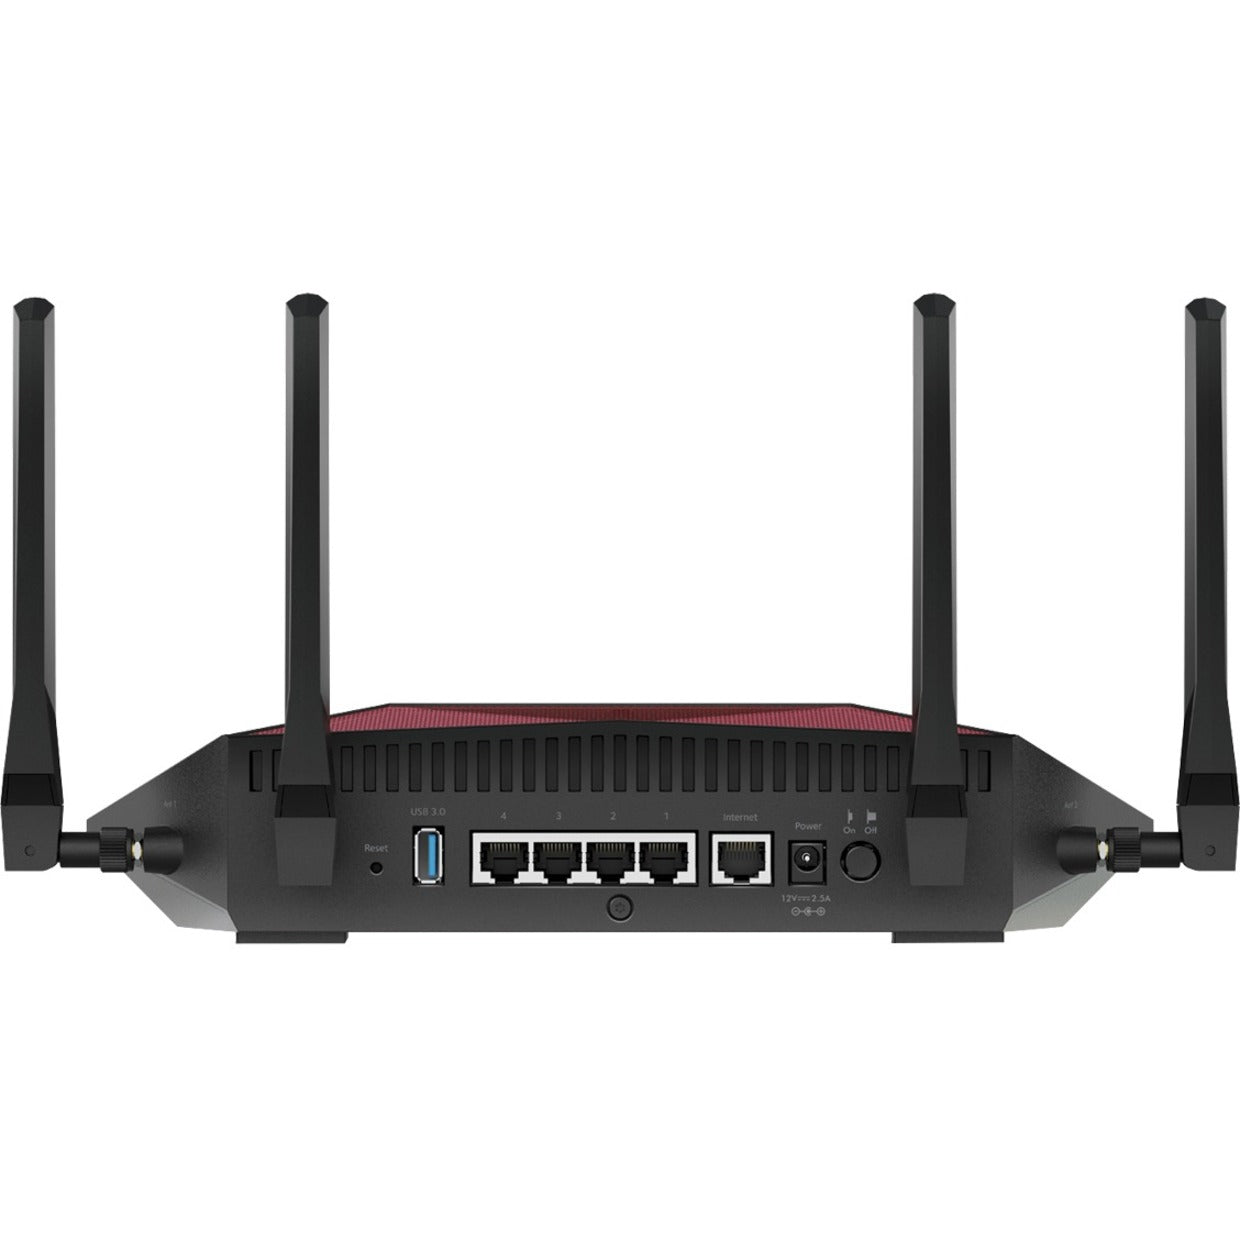 Netgear XR1000-100NAS Nighthawk Pro Gaming WiFi 6 Router, Stabilize Ping, Reduce Lag Spikes